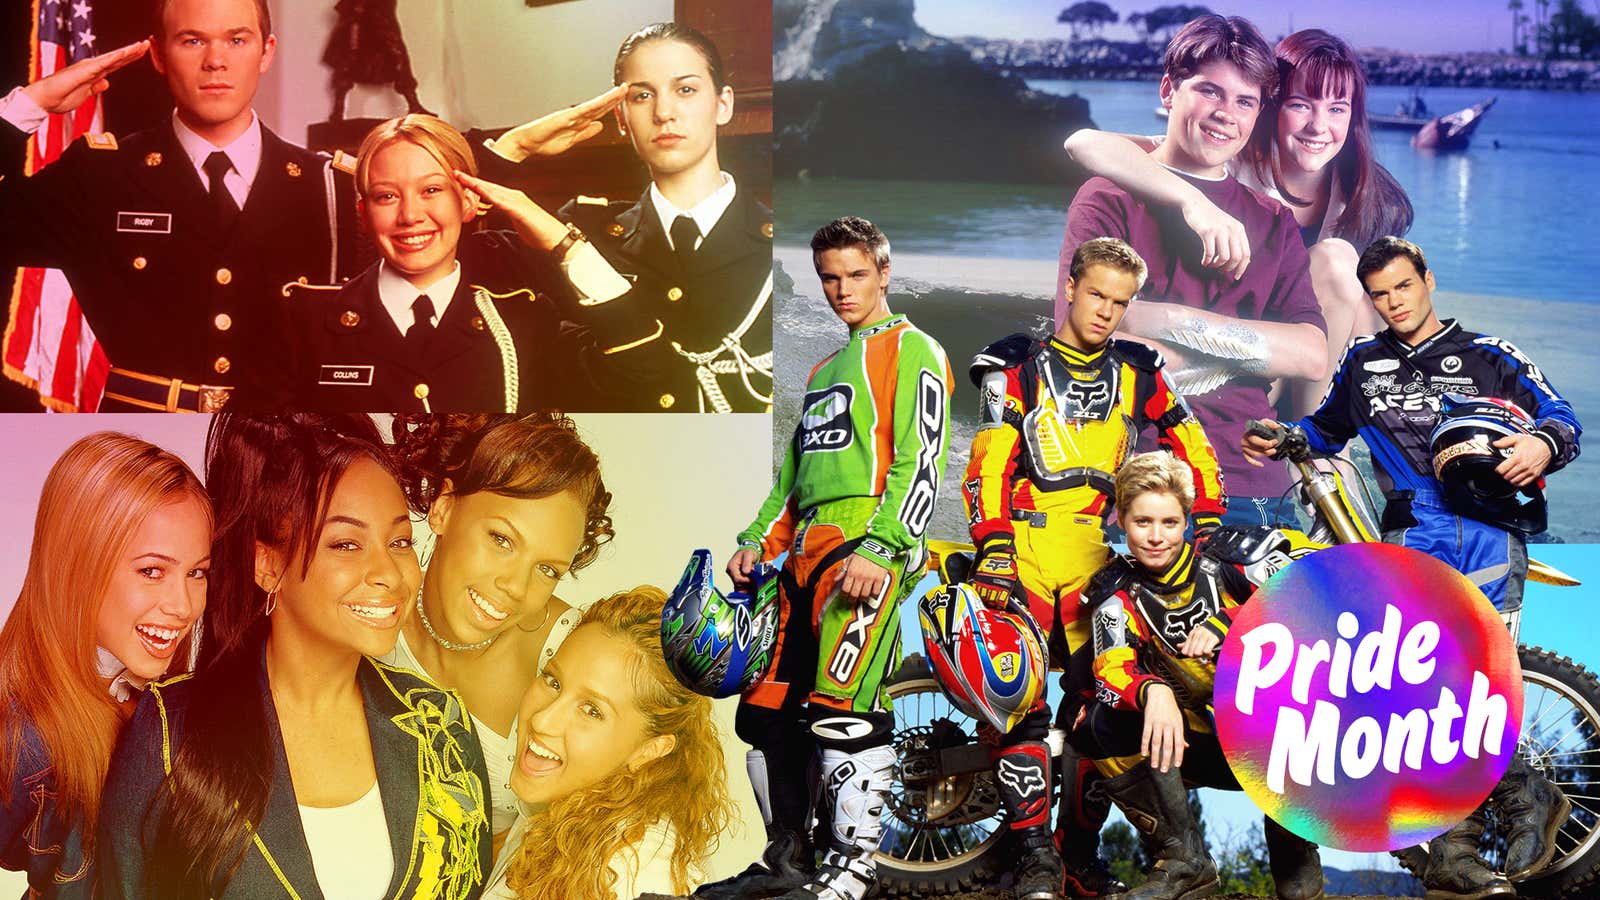 Clockwise from top left: Cadet Kelly, The Thirteenth Year, Motocrossed, and The Cheetah Girls (Screenshots: Disney+) 